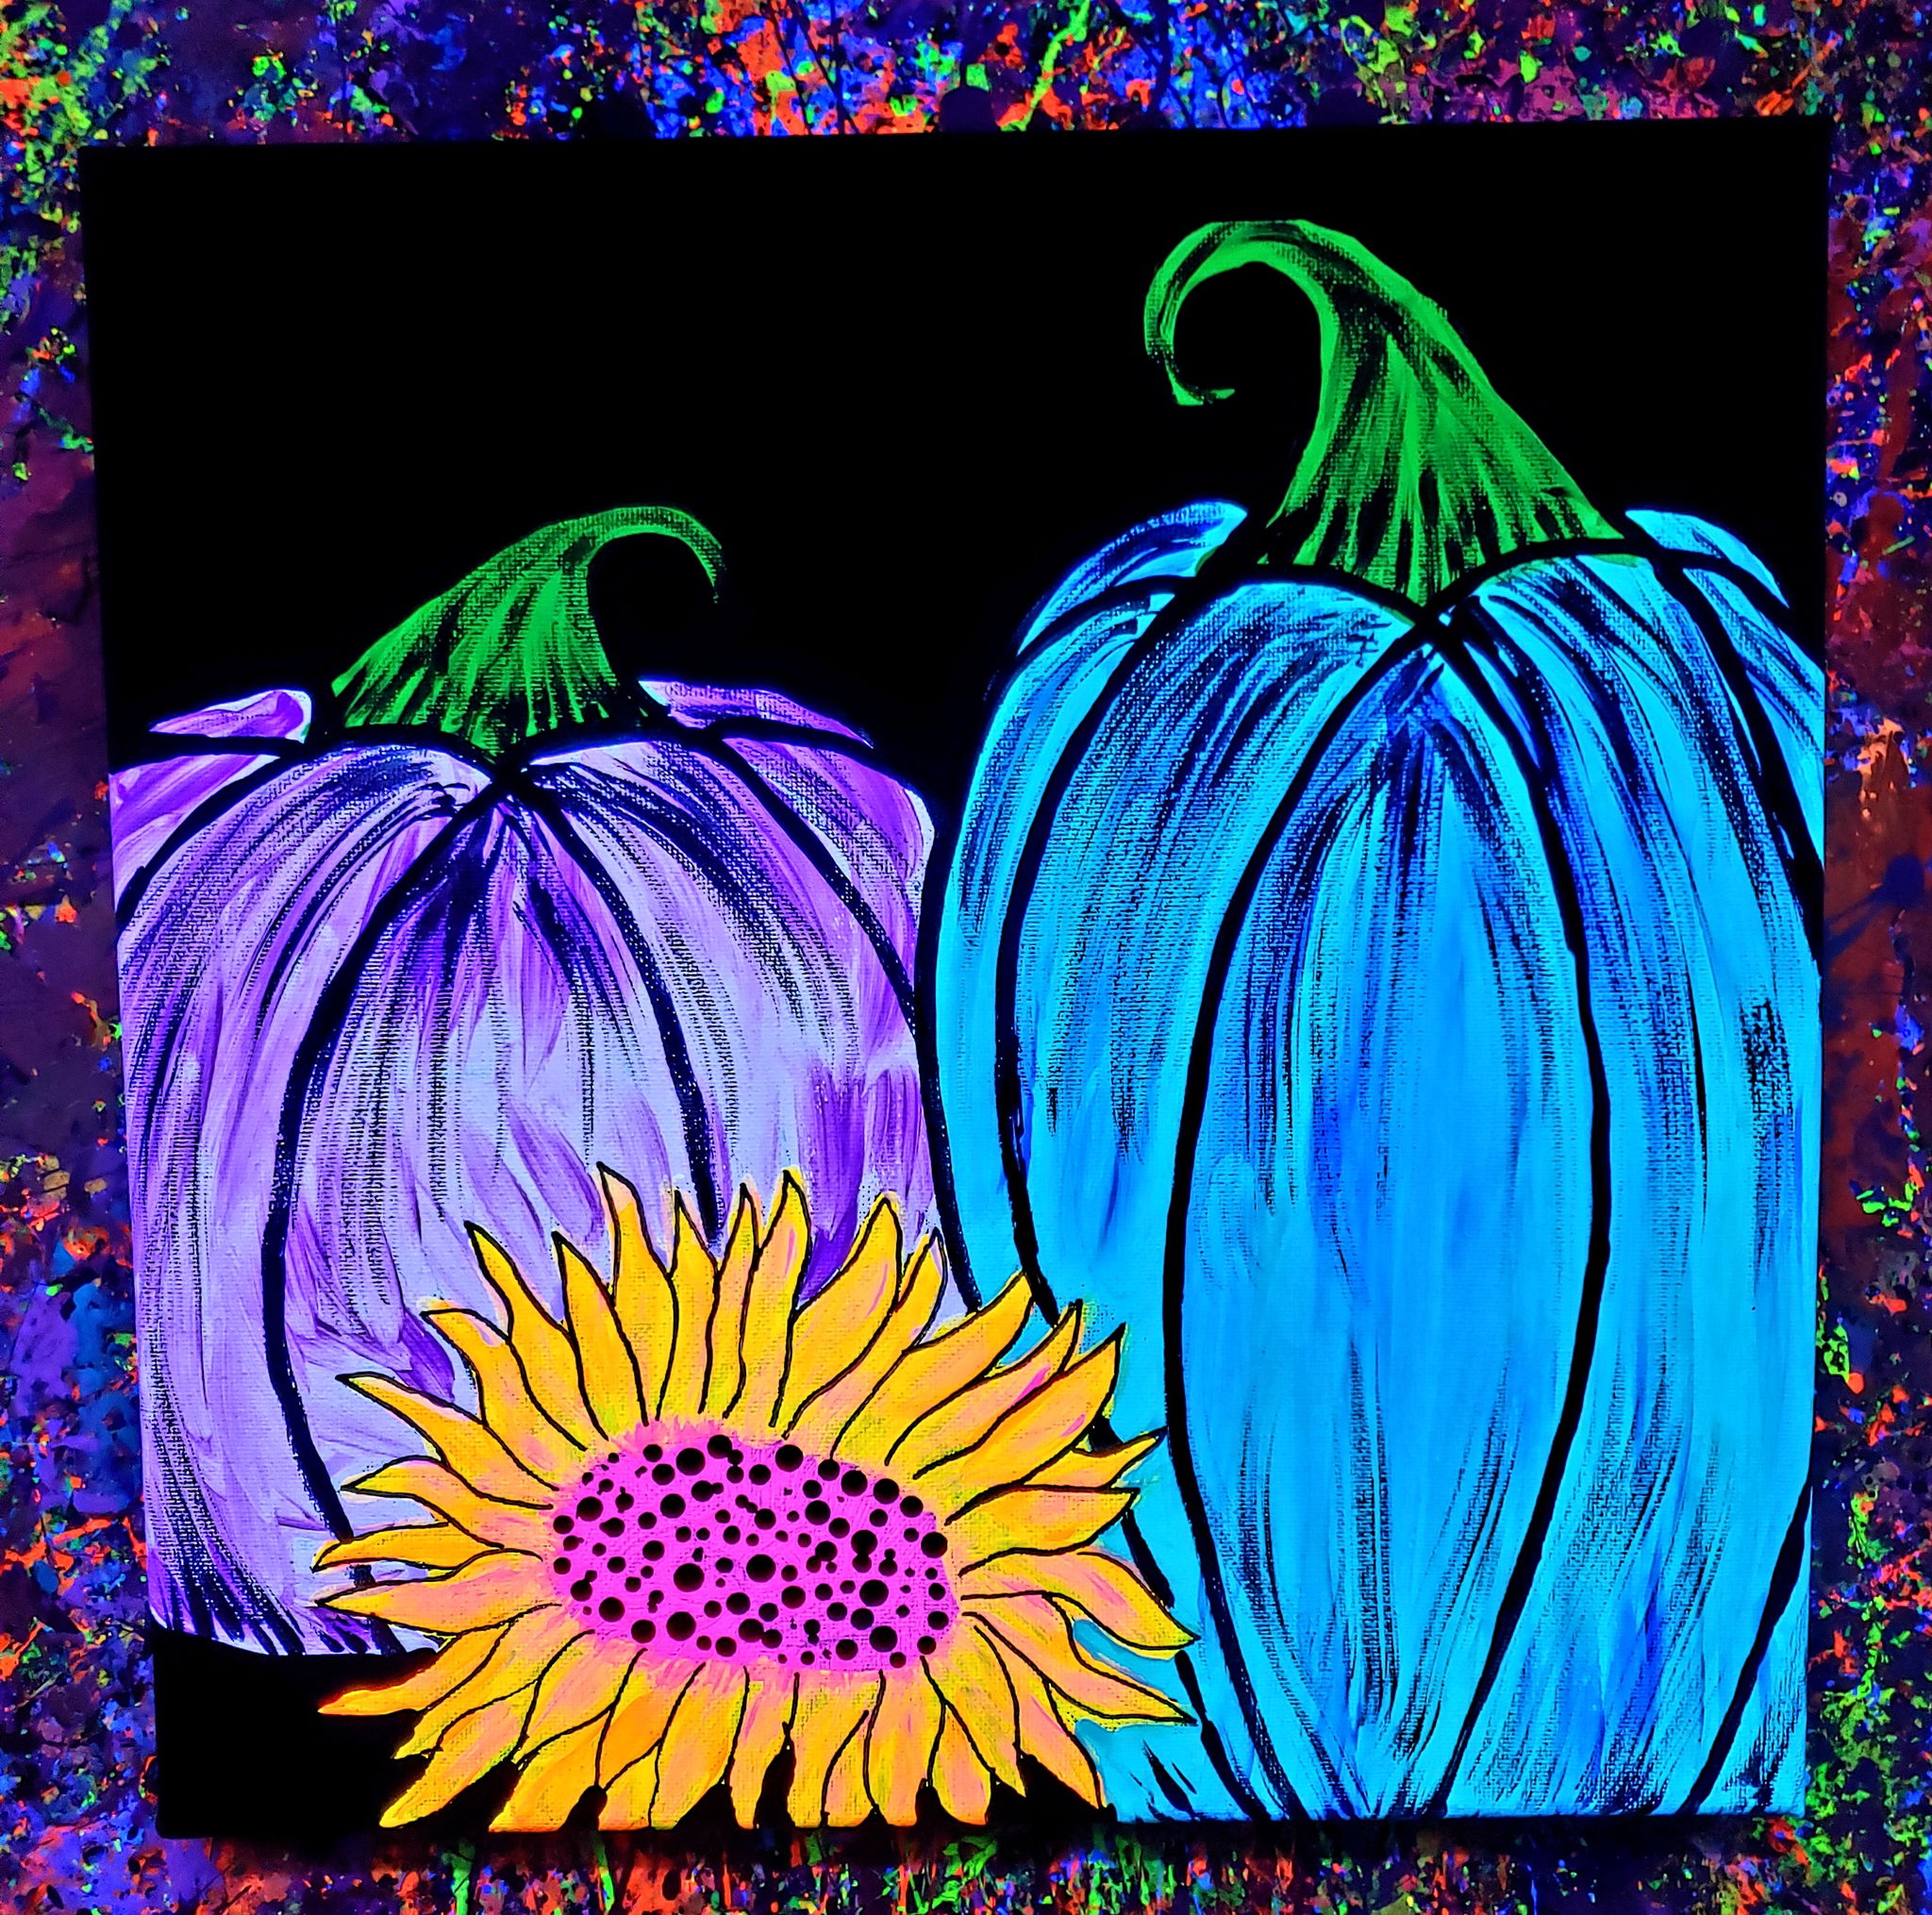 Day Of The Dead &Amp; Halloween Glow In The Dark Canvas Paint Party